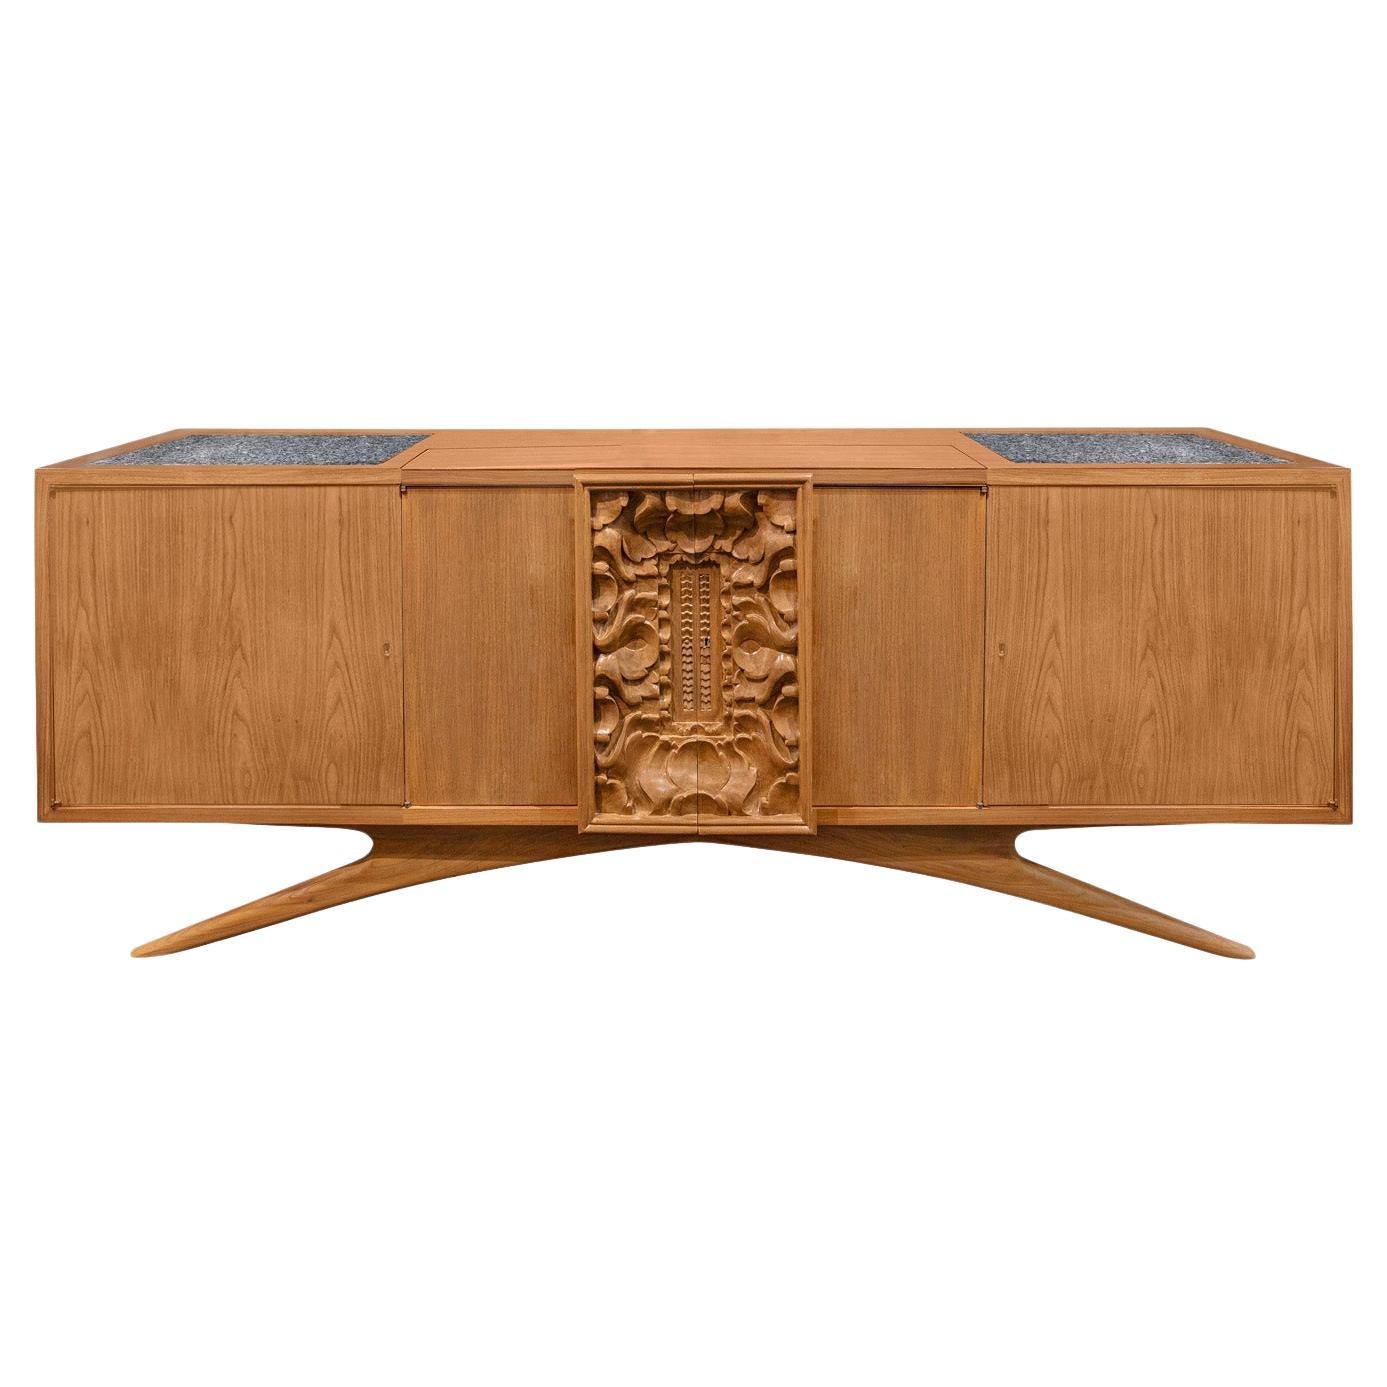 Vladimir Kagan One-of-a-Kind Credenza with Carved Center Panels 1940s (Signed) For Sale